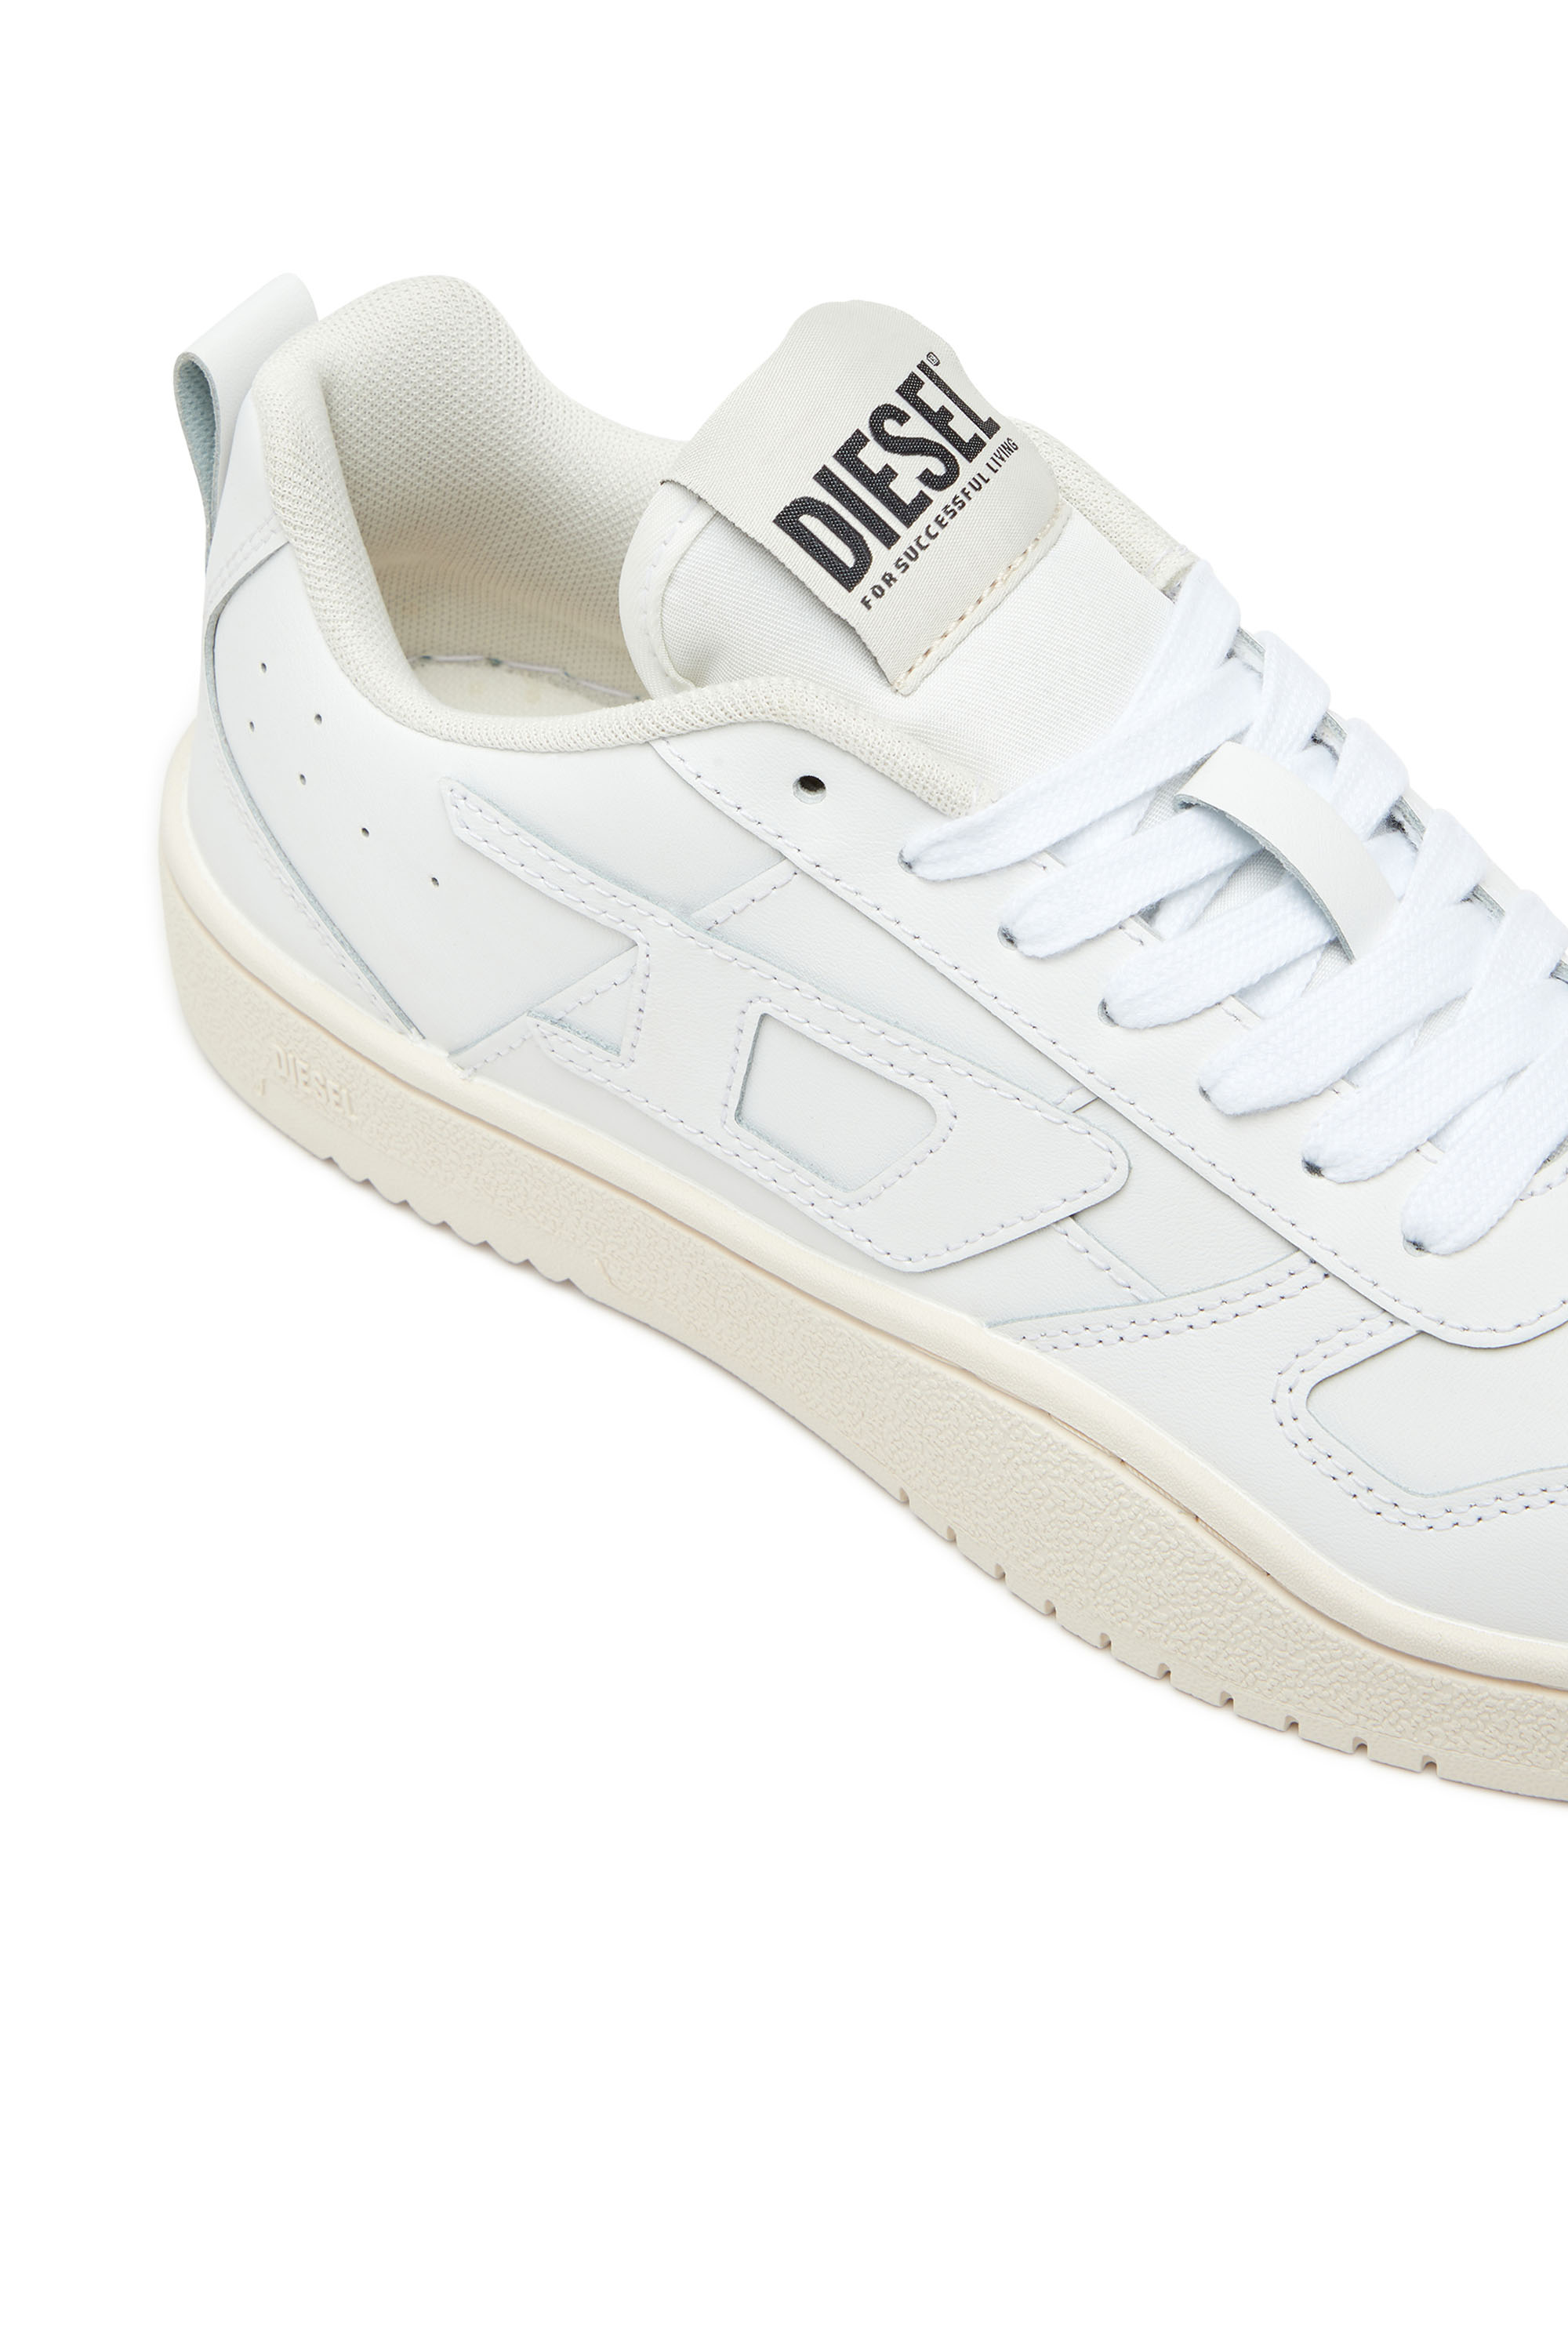 Diesel - S-UKIYO V2 LOW W, Woman S-Ukiyo Low-Low-top sneakers in leather and nylon in White - Image 6